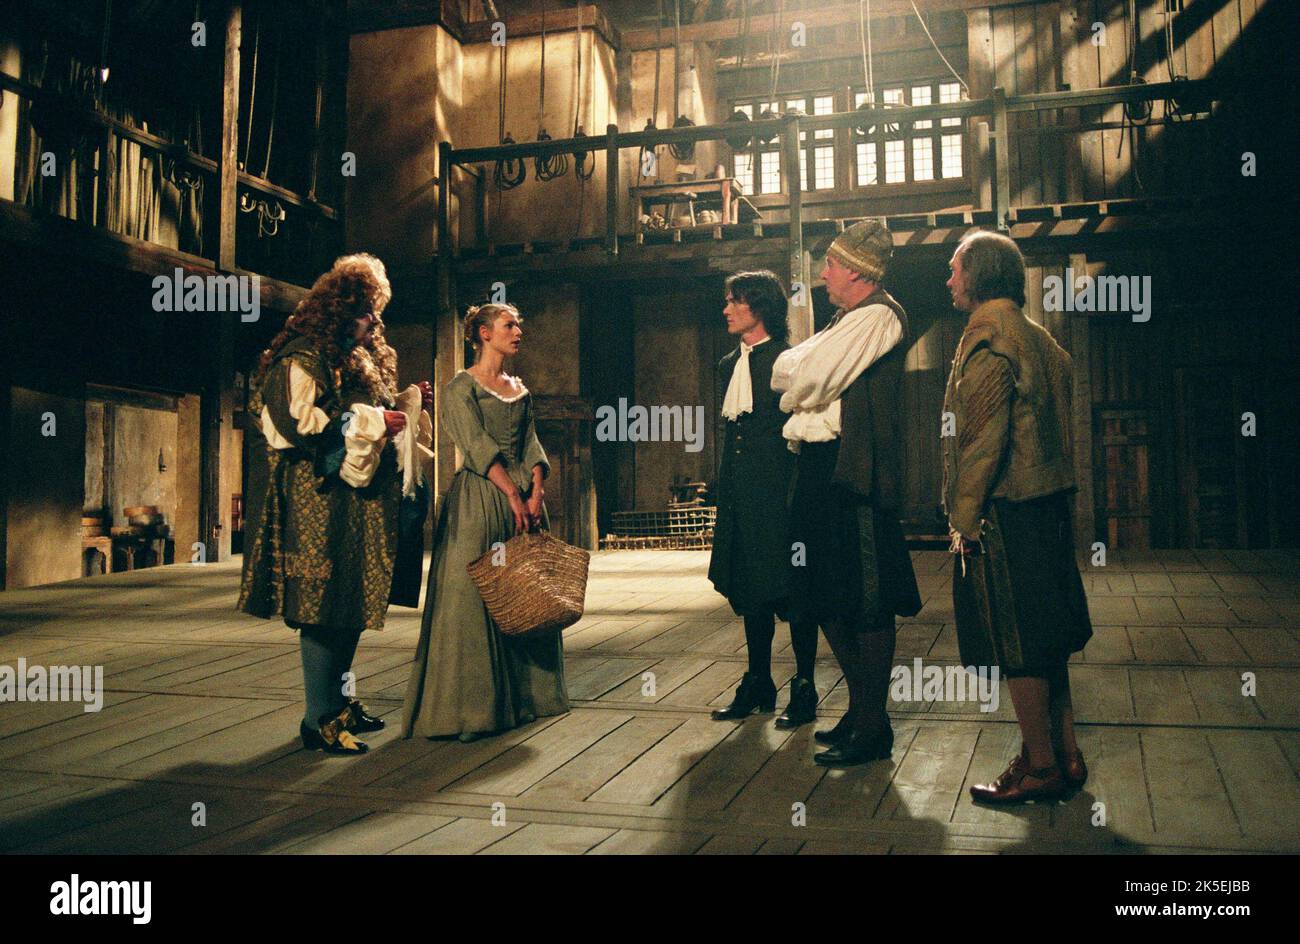 RICHARD GRIFFITHS, CLAIRE DANES, BILLY CRUDUP, TOM WILKINSON, STAGE BEAUTY, 2004 Stock Photo